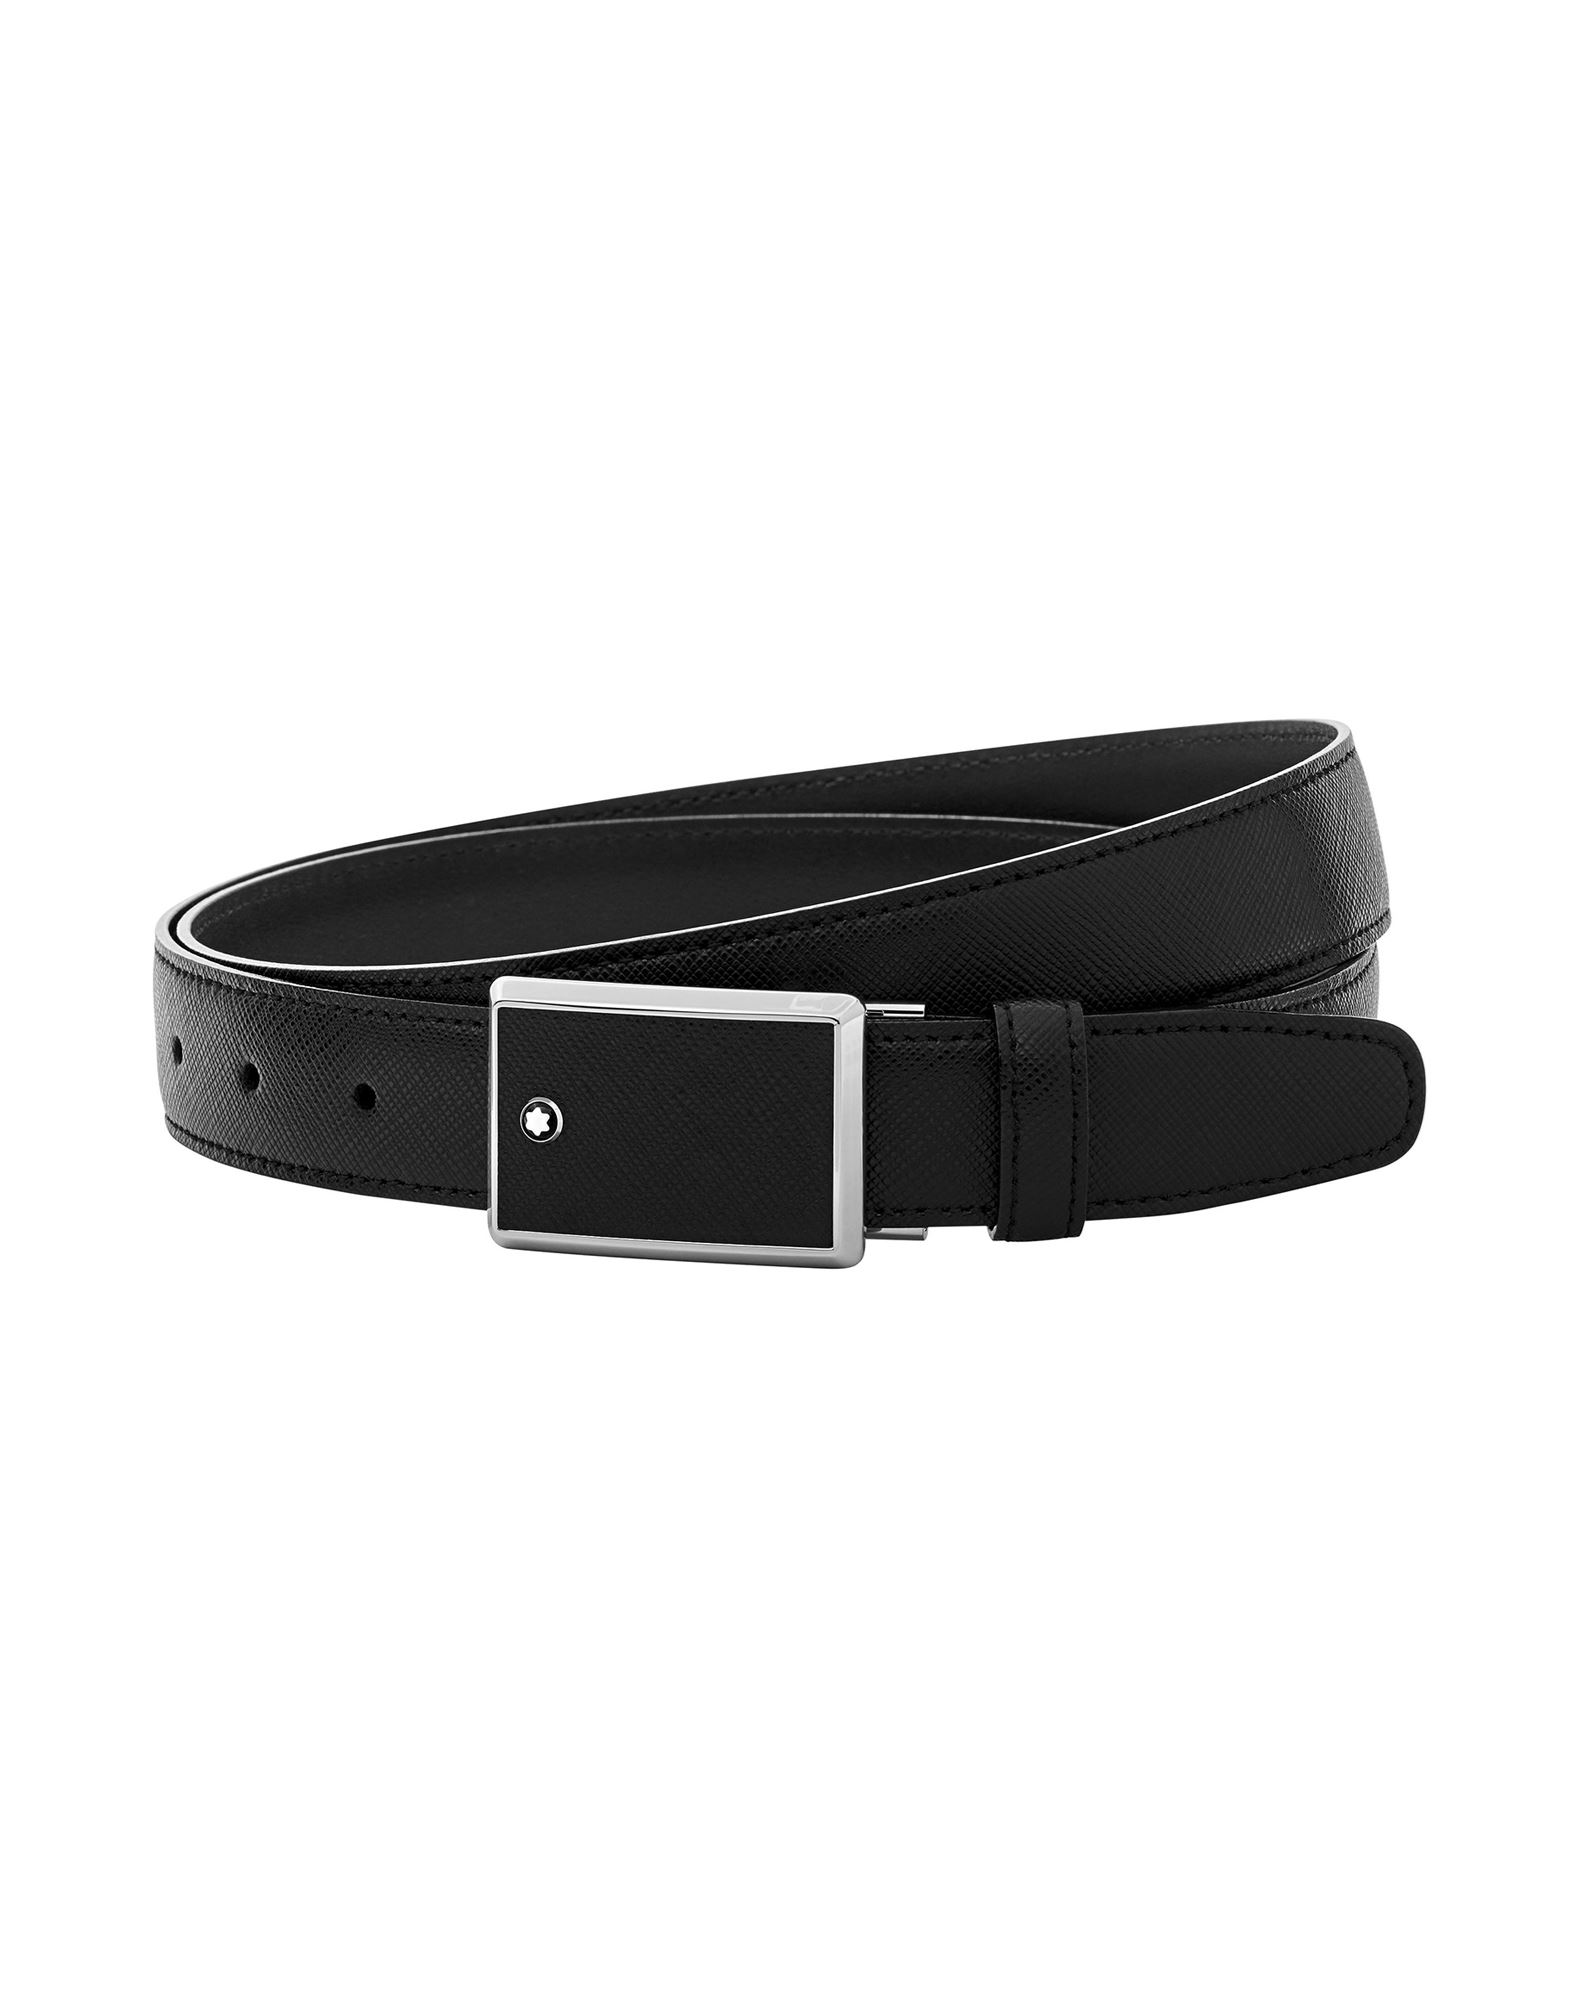 ԥ볫MONTBLANC  ٥ ֥å one size סʥա /  RECTANGULAR FRAMED BLACK SAFFIANO PRINTED LEATHER &STAINLESS STEEL PLATE BUCKLE BELT